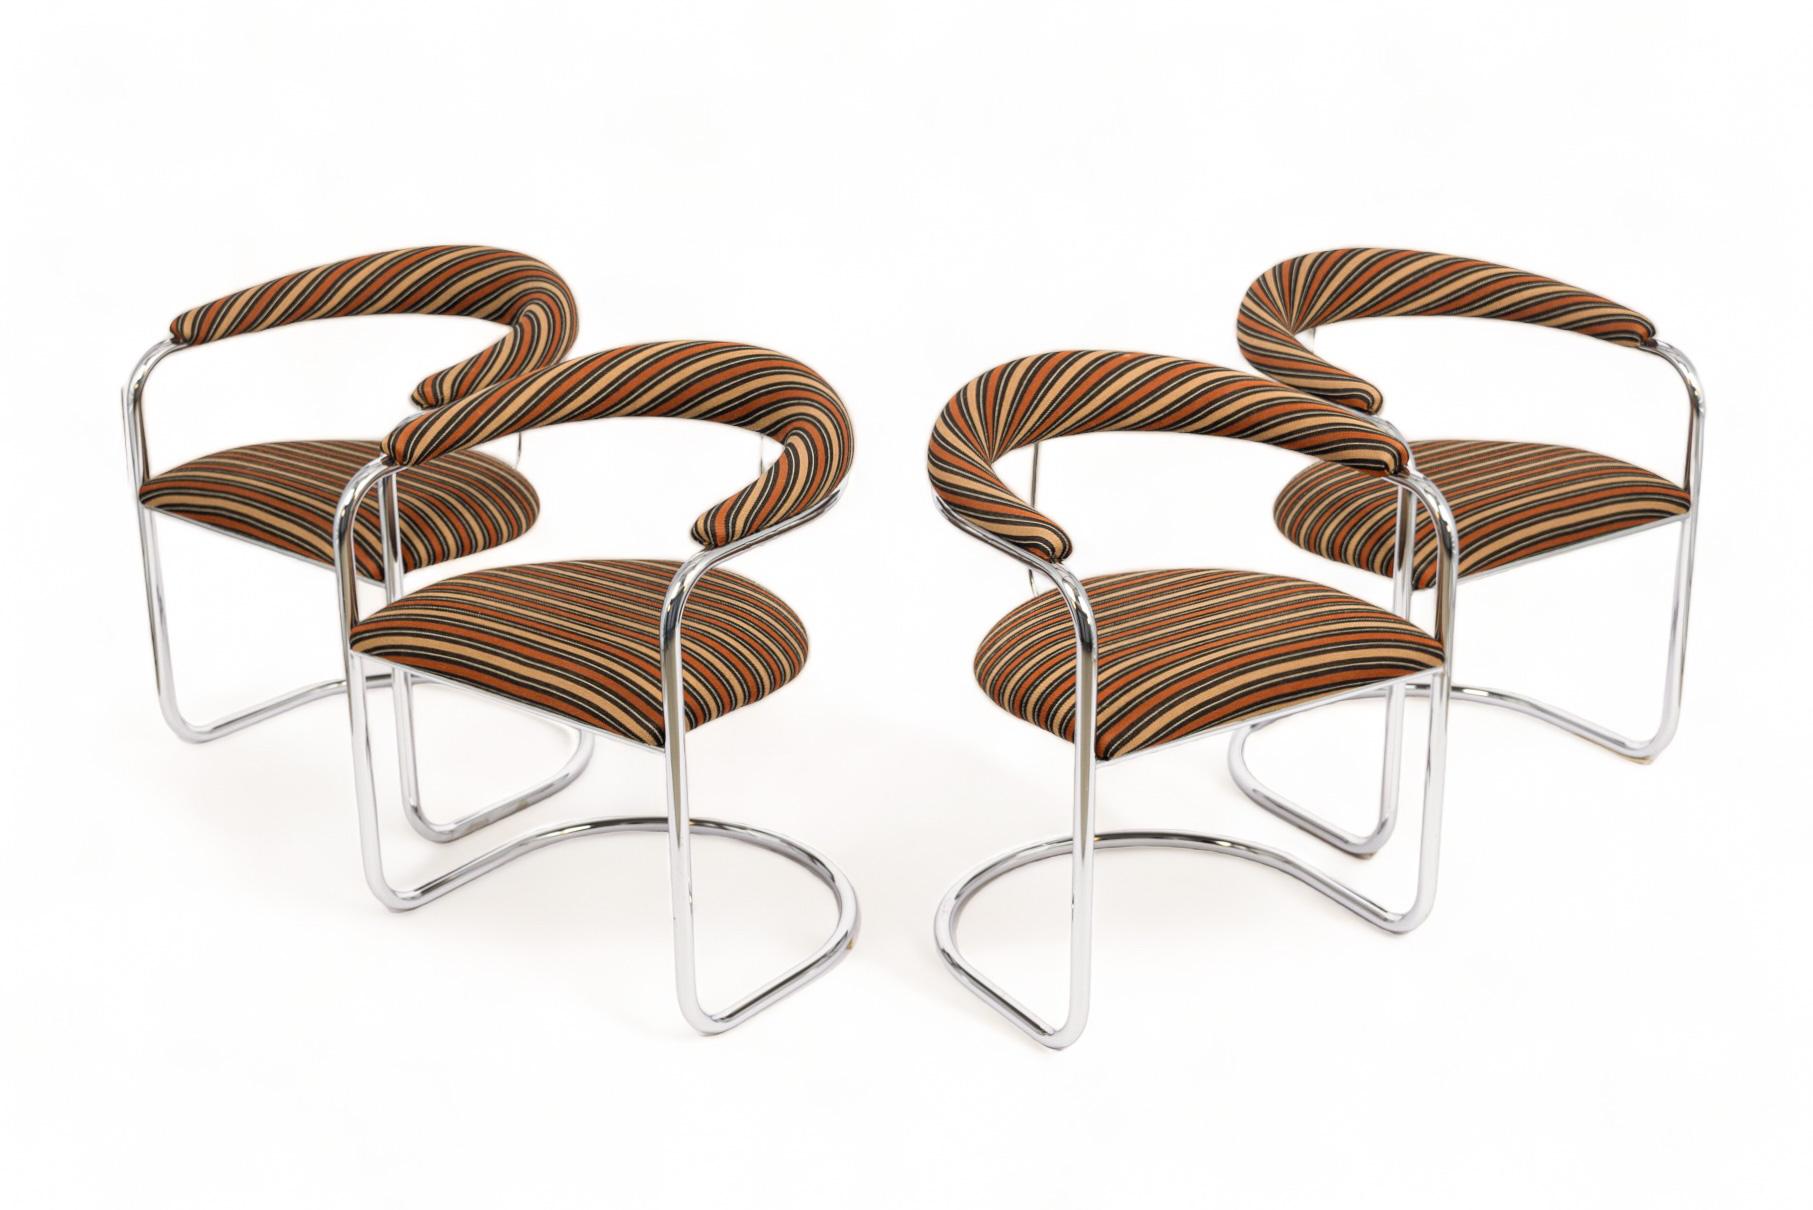 This set of four vintage mid century modern SS33 dining chairs were designed by Anton Lorenz and manufactured by Thonet. These iconic Bauhaus arm chairs feature chrome-plated tubular steel cantilevered frames with striped upholstery fabric on seat